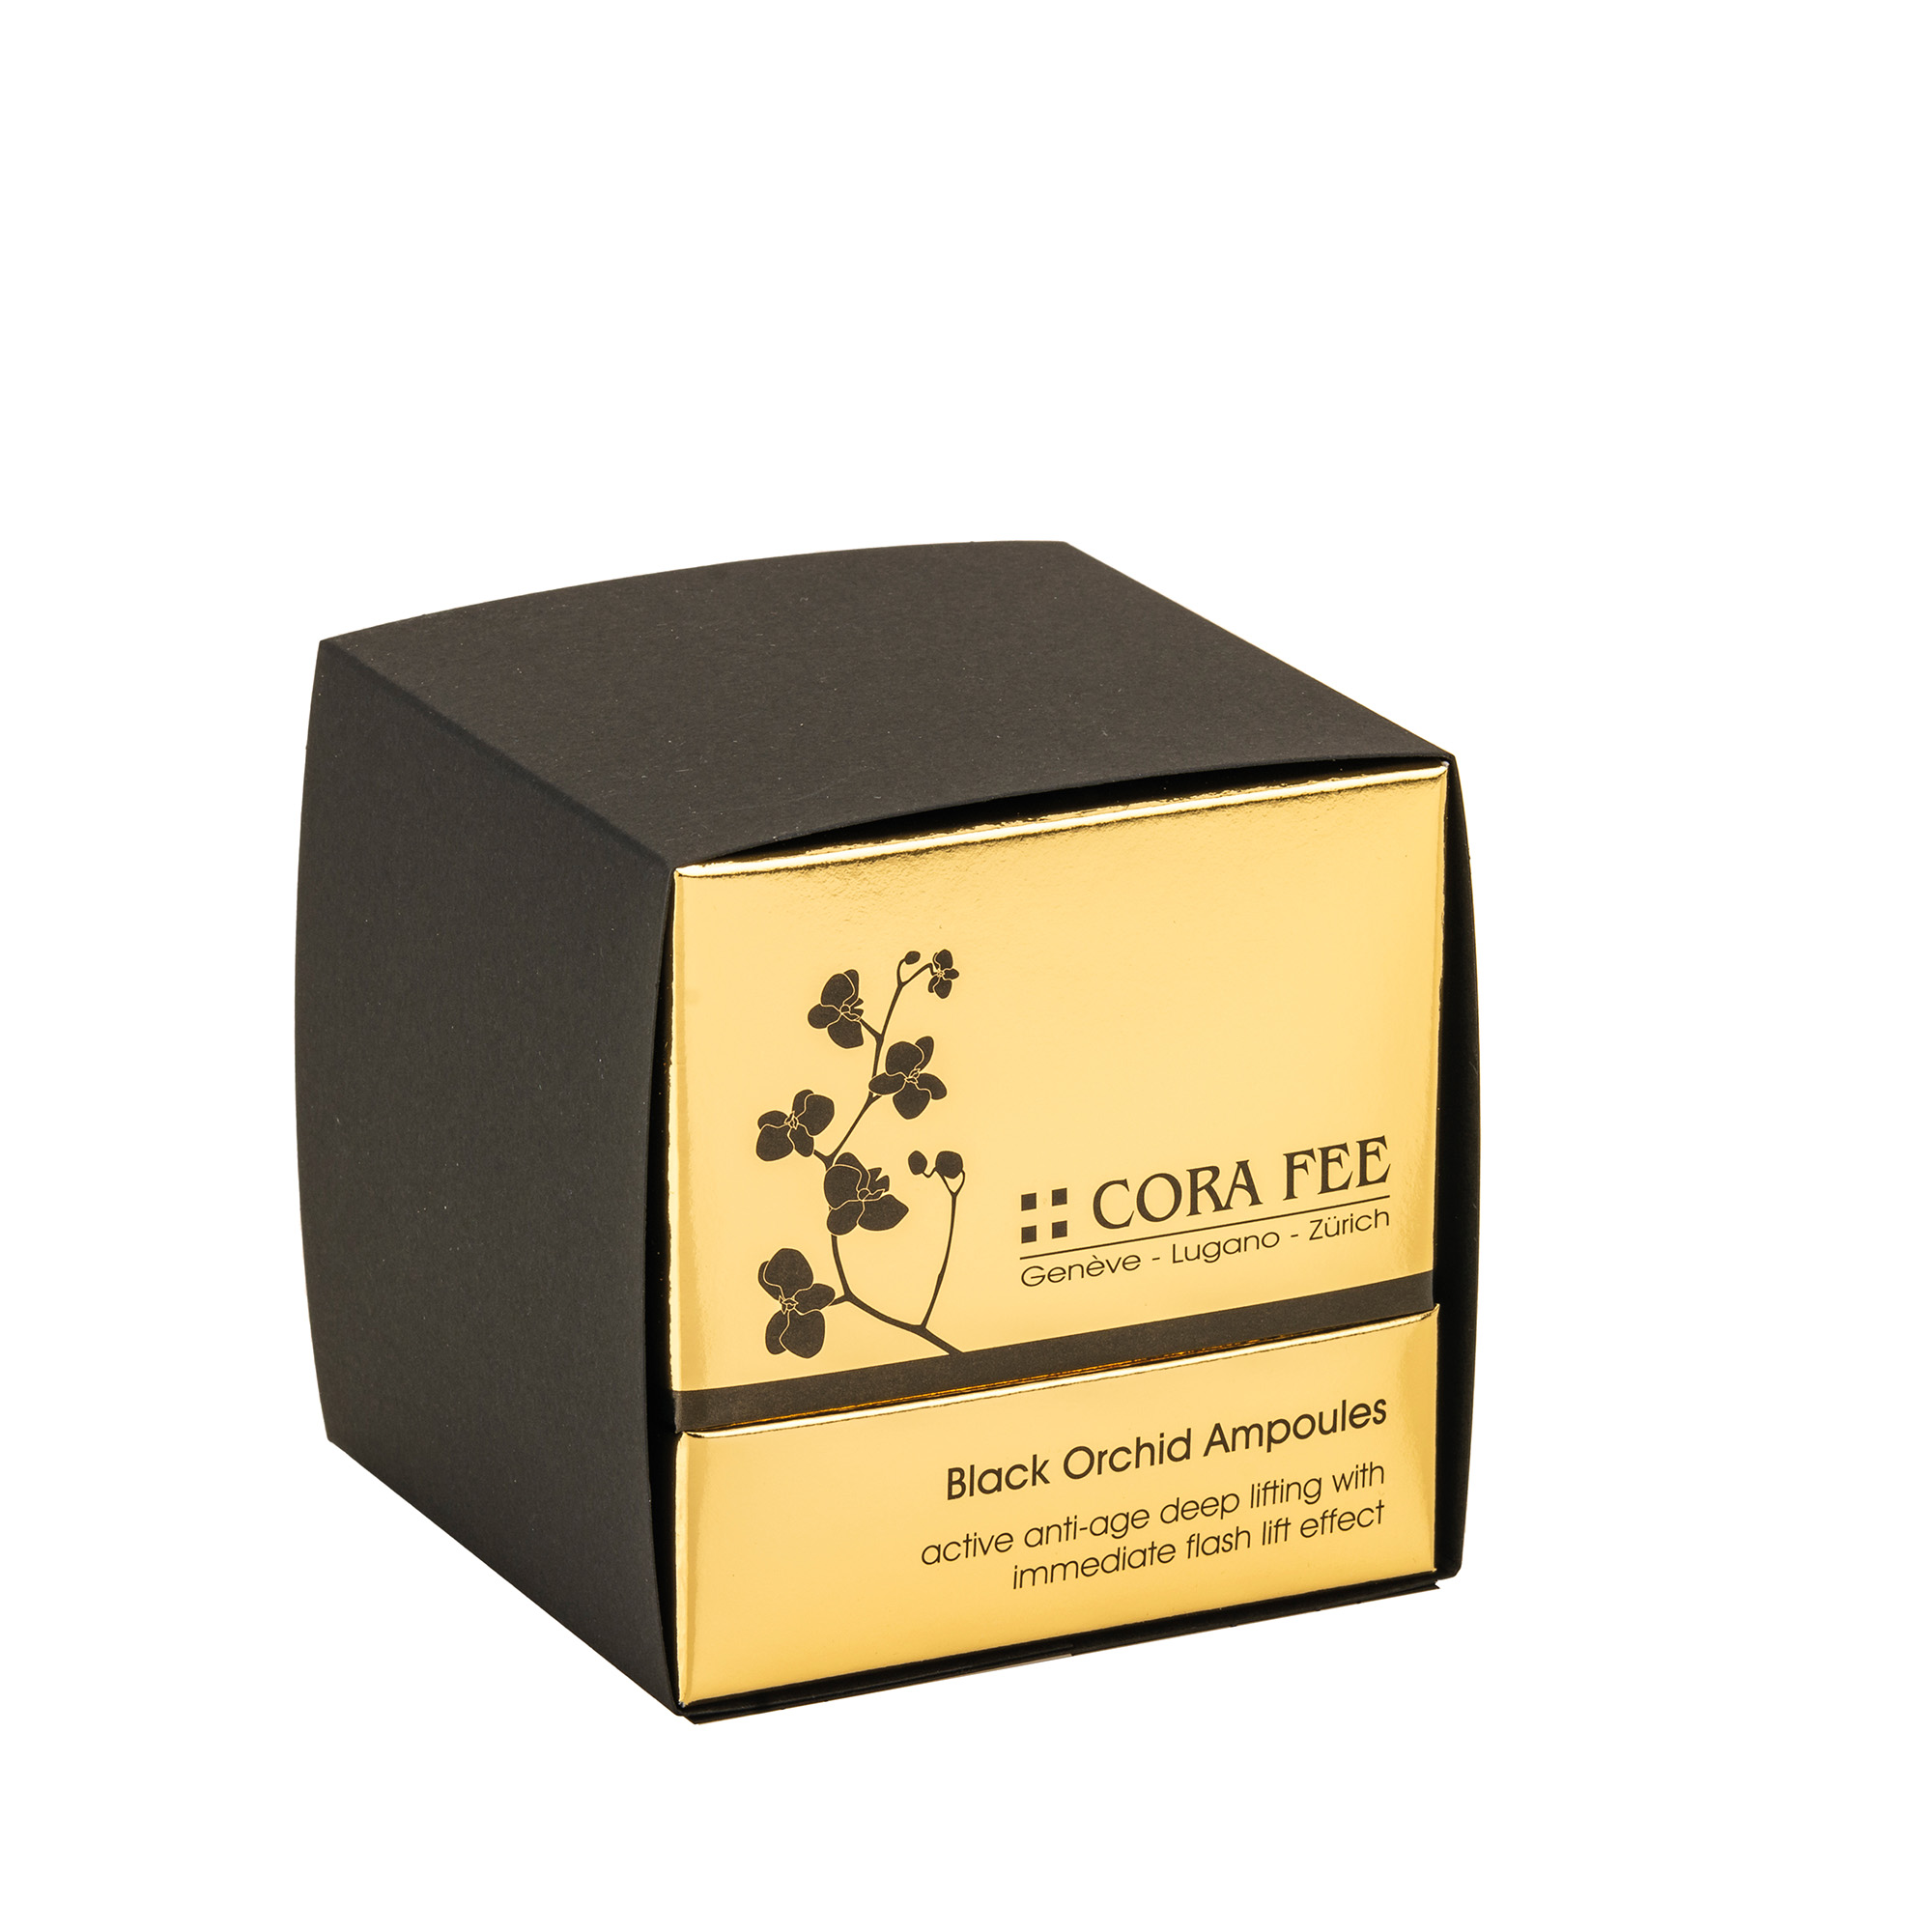 Cora Fee Black Orchid Ampullen, Anti-Aging Tiefenlifting, 14 x2 ml